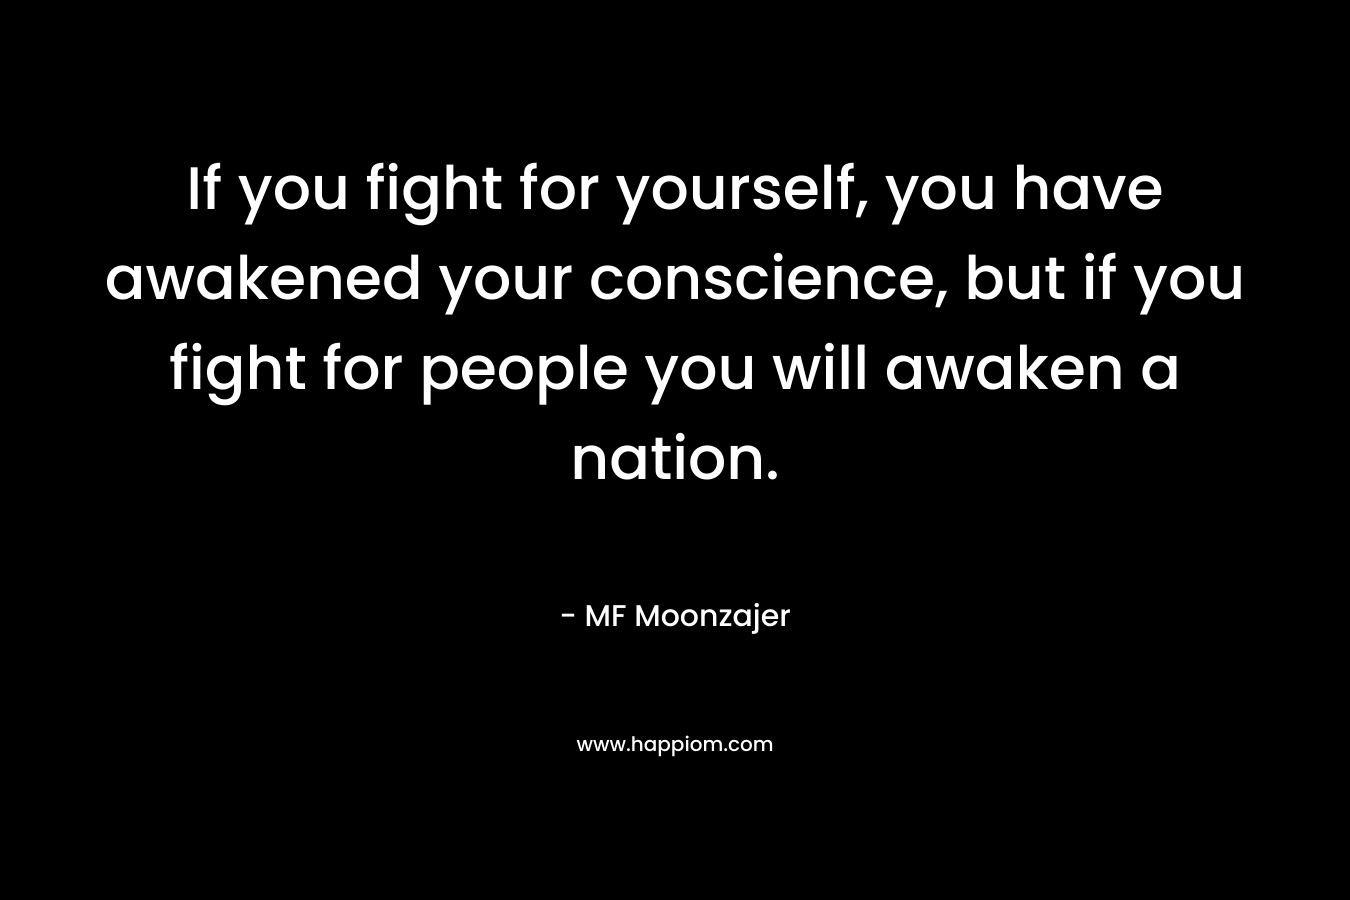 If you fight for yourself, you have awakened your conscience, but if you fight for people you will awaken a nation.